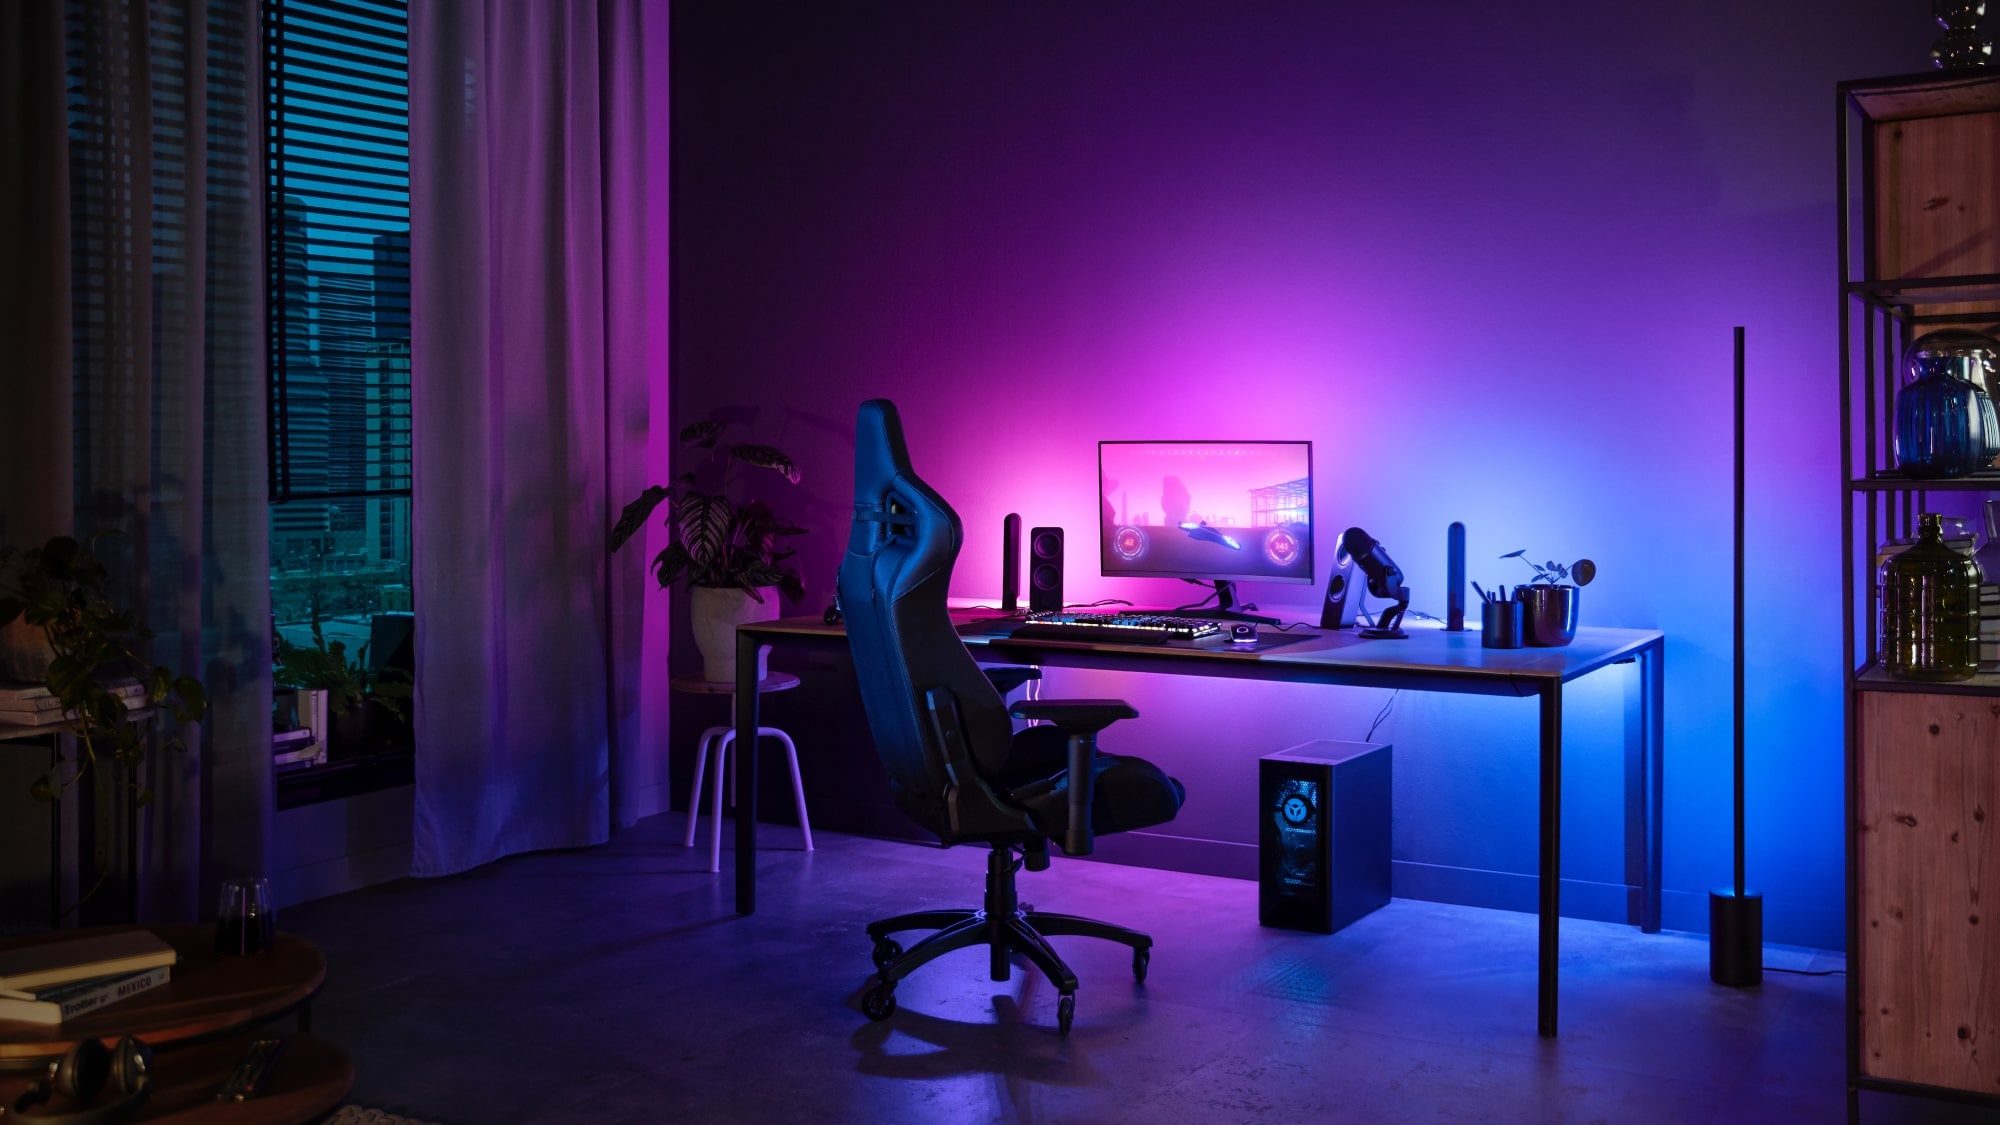 https://www.philips-hue.com/content/dam/hue/en-us/products/category-pages/gaming/gaming-room-16-9.jpg